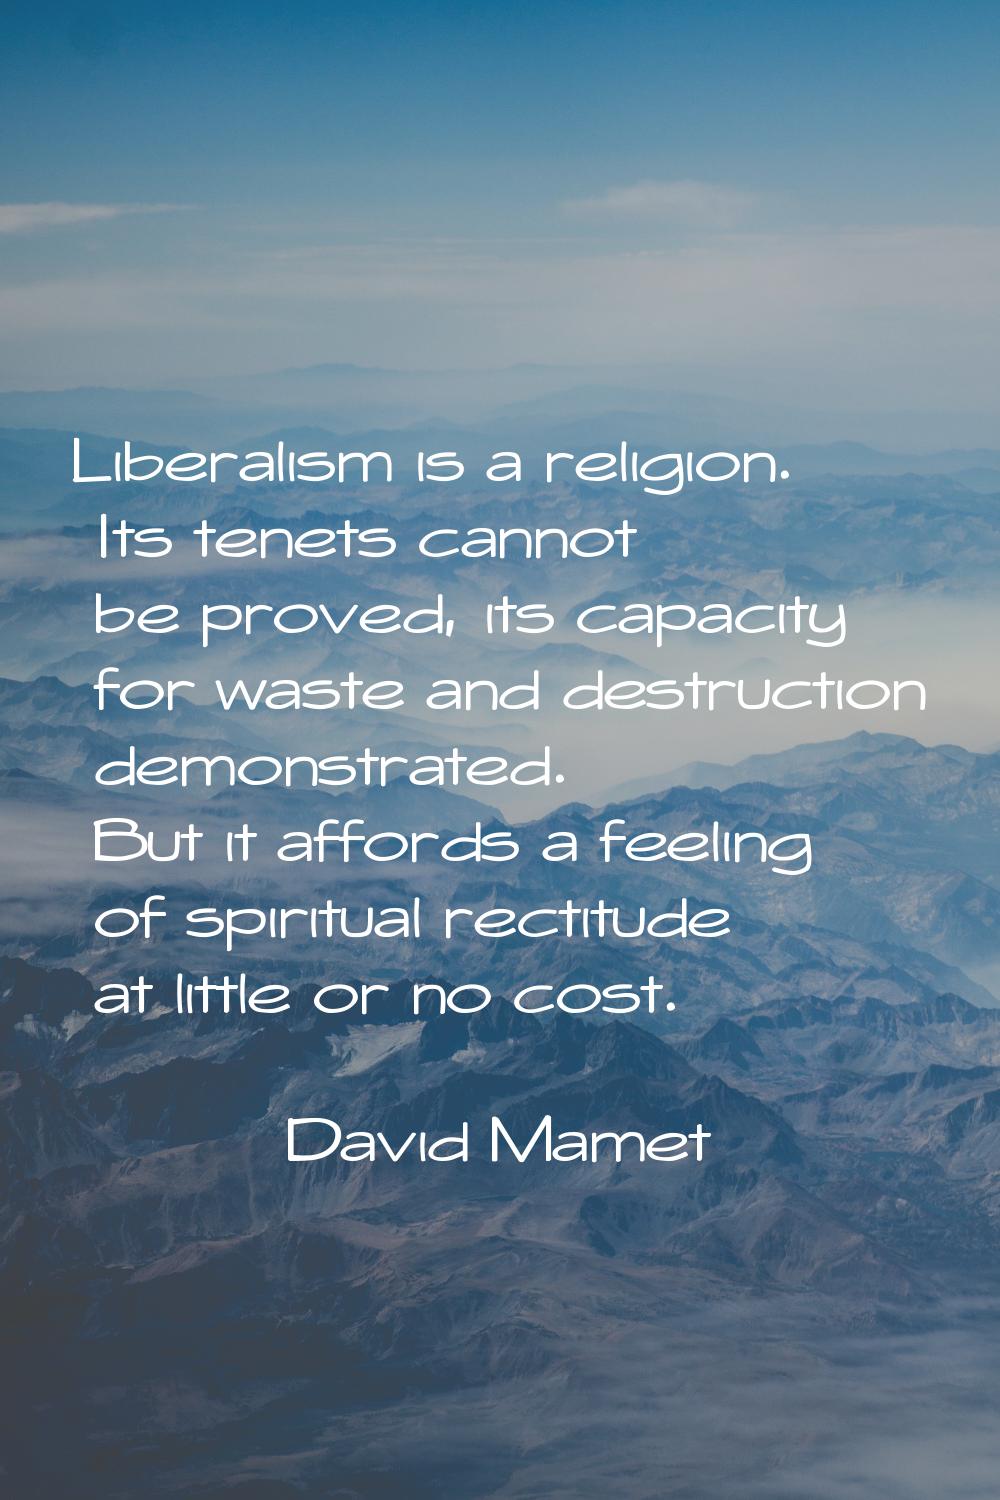 Liberalism is a religion. Its tenets cannot be proved, its capacity for waste and destruction demon